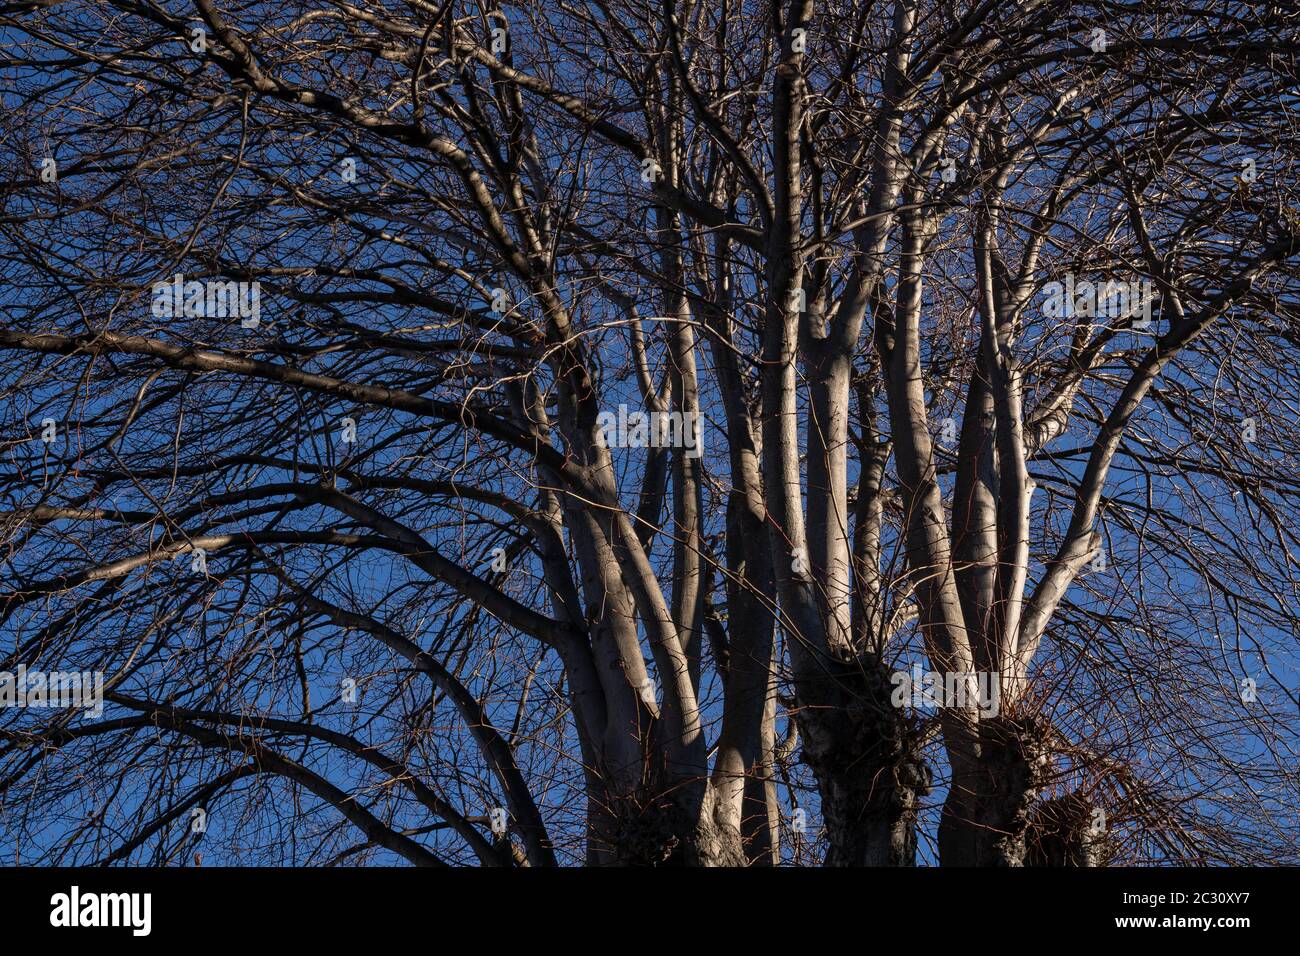 A nature of winter trees without leaves after autumn season in Oamaru, New Zealand. Stock Photo